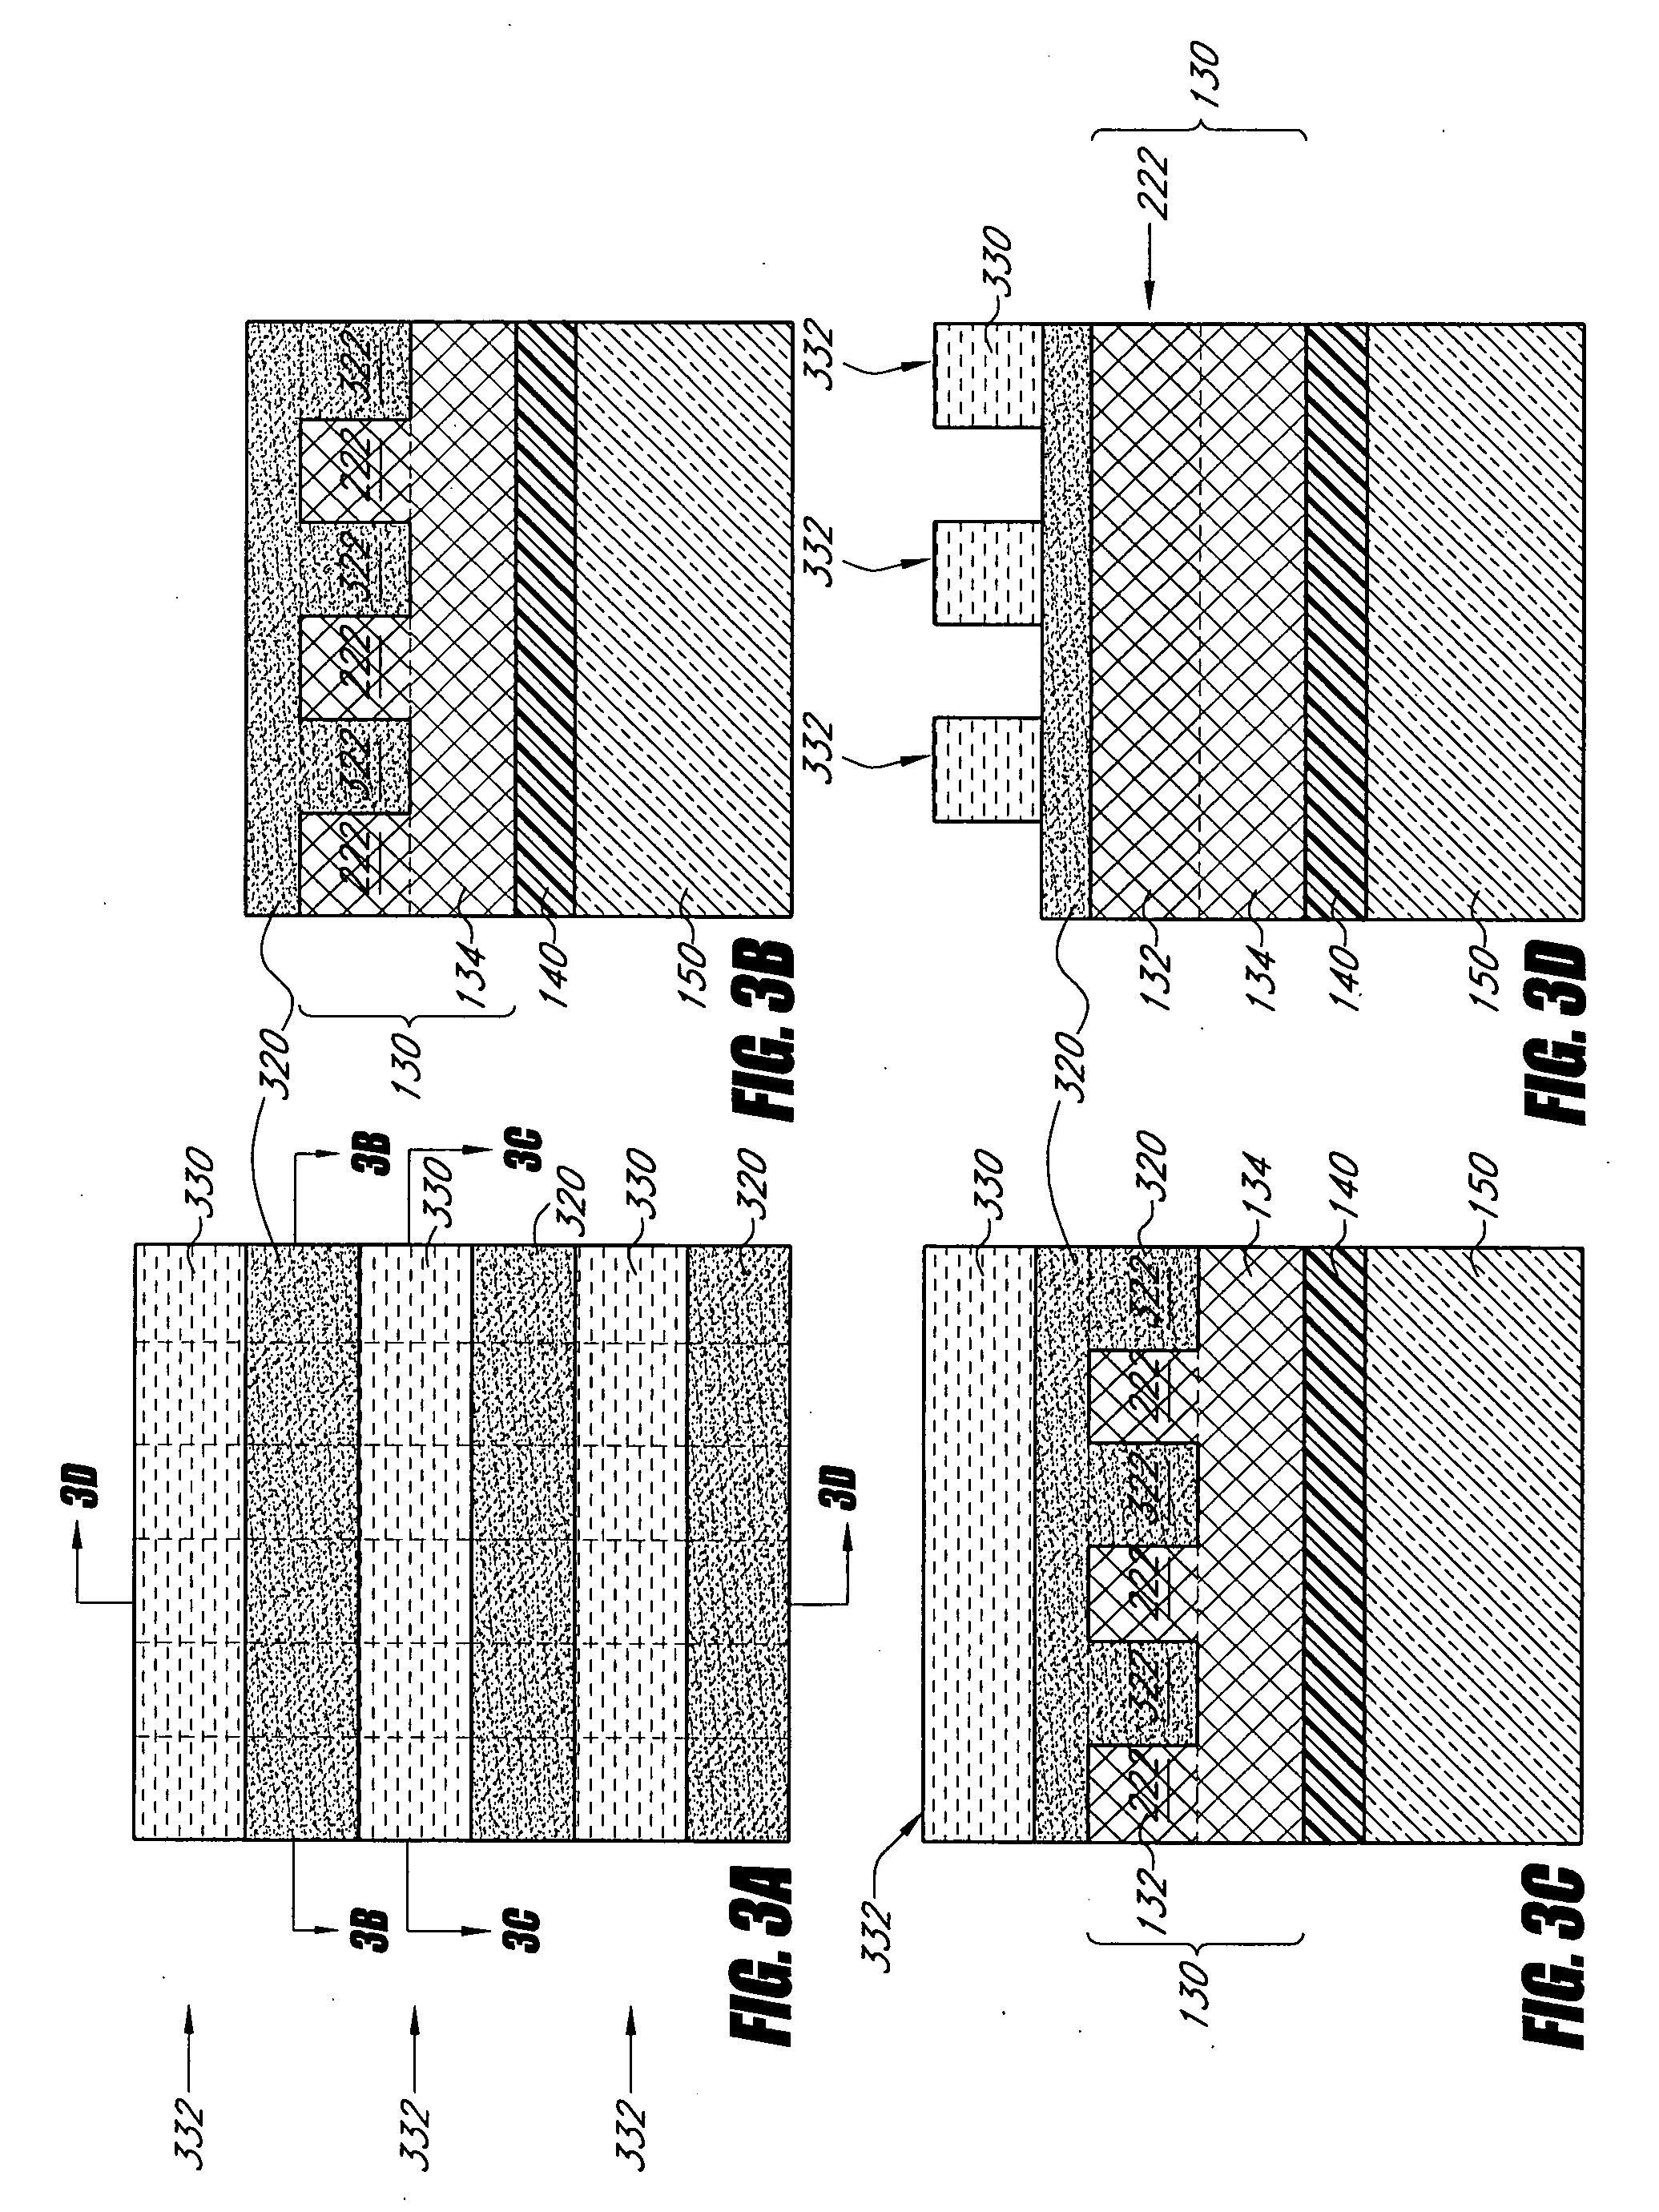 Methods for forming arrays of small, closely spaced features